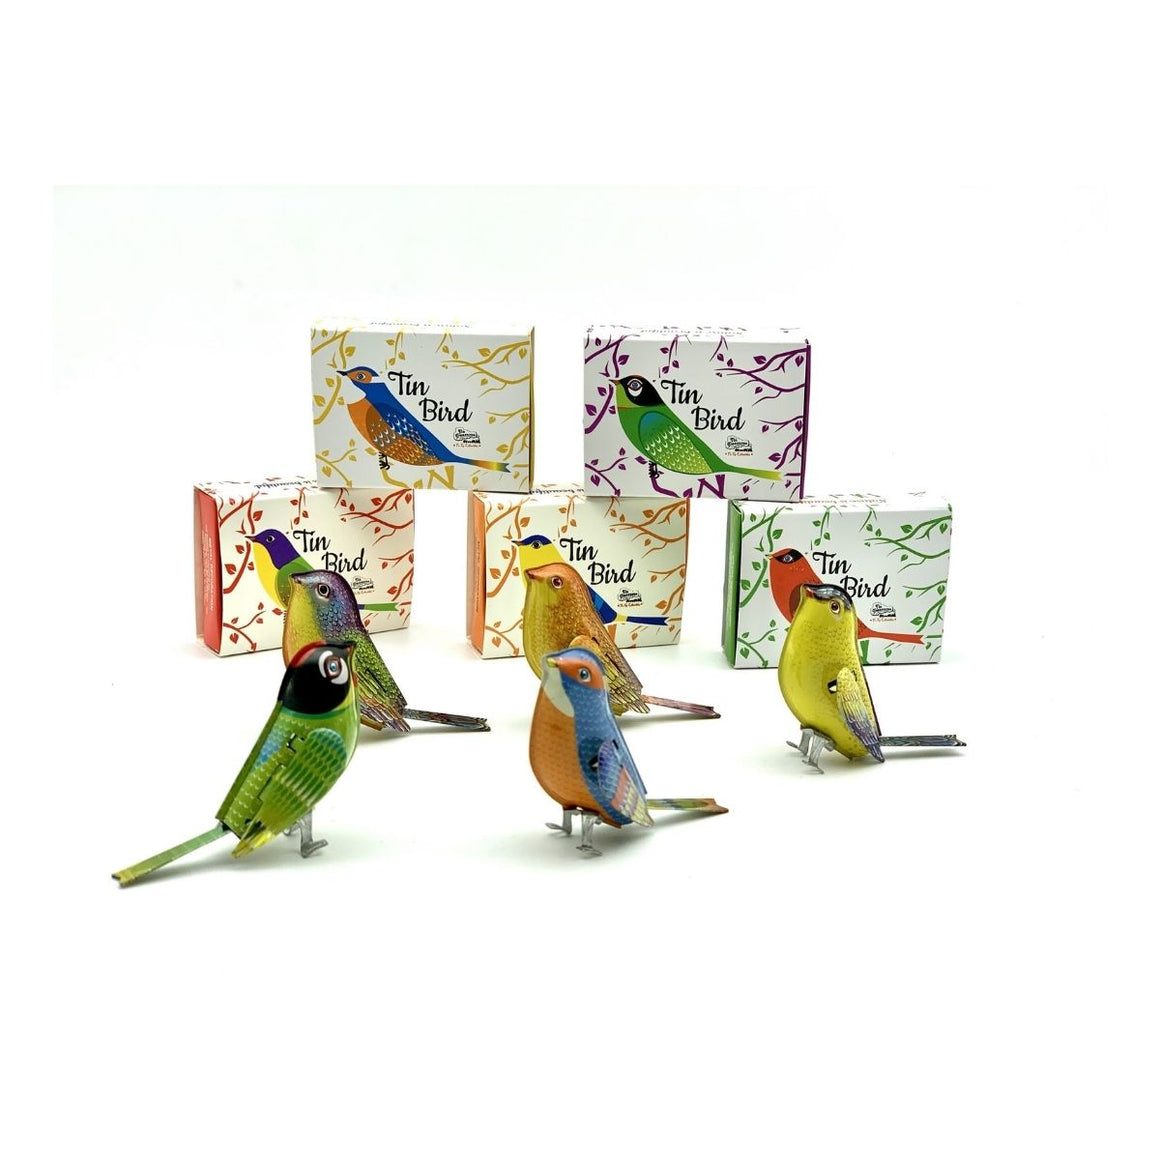 Photograph including five colourful tin birds in the front of the image with their cardboard packaging siting behind them